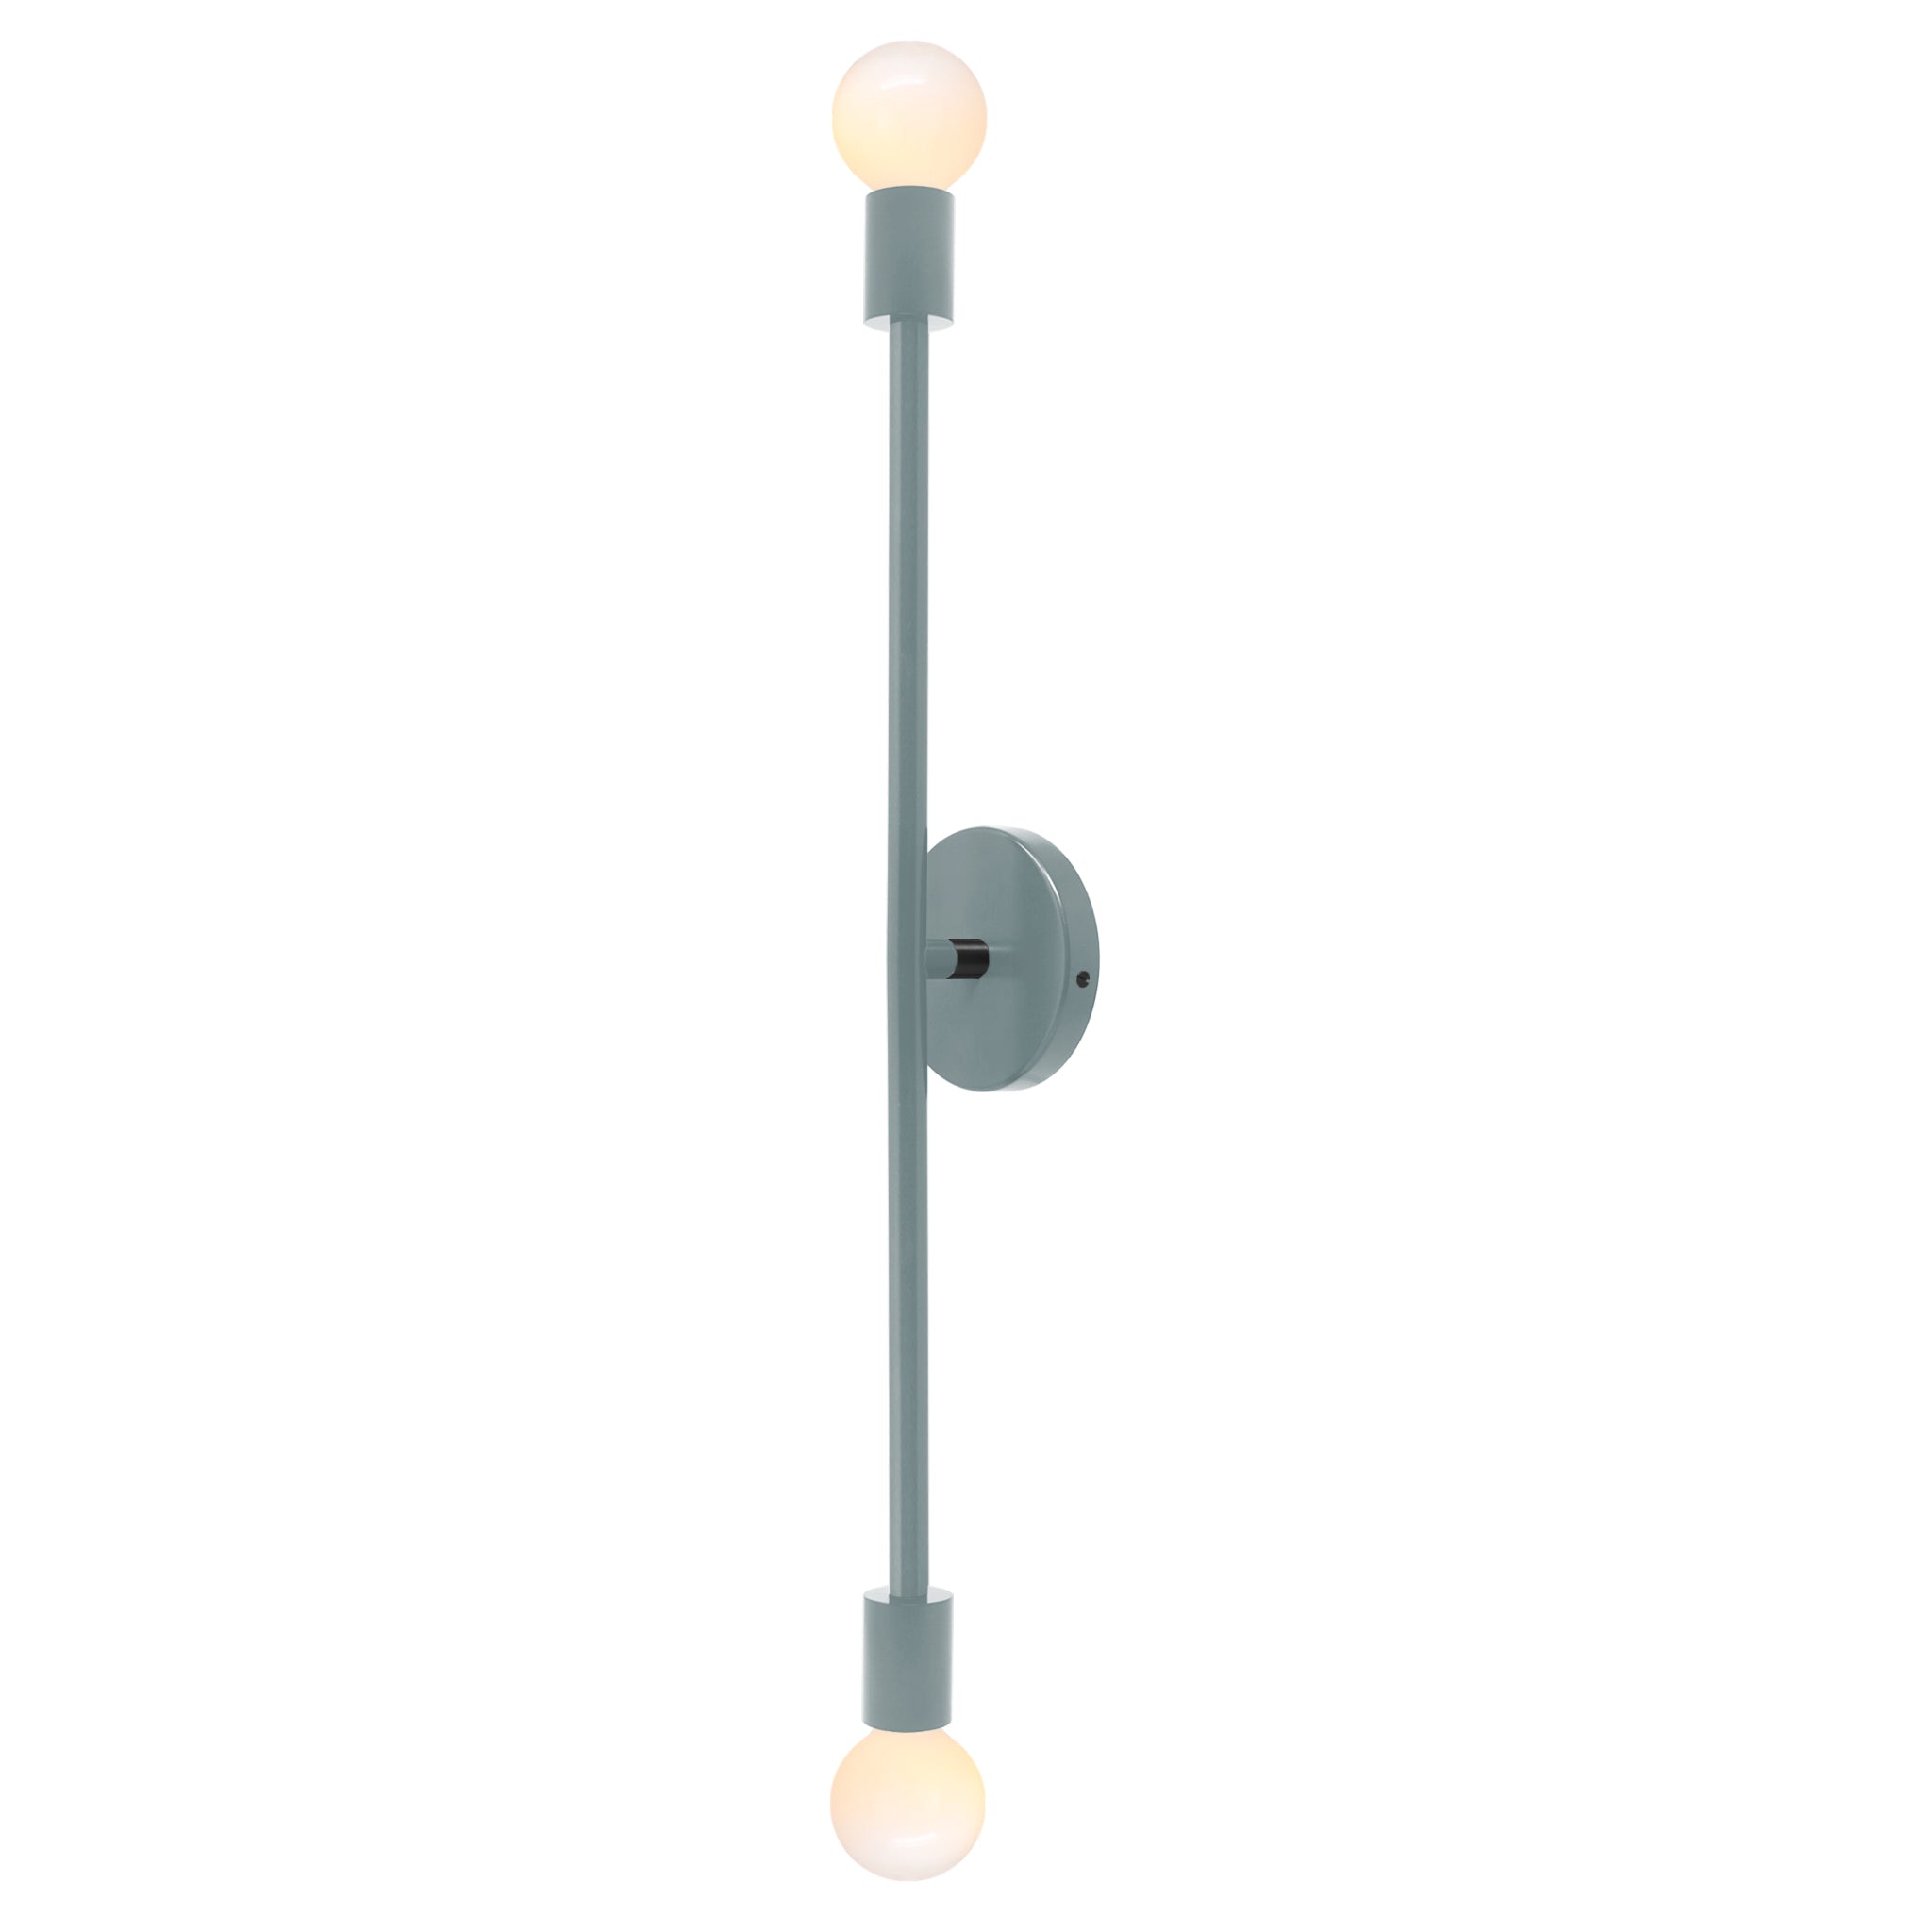 Black and lagoon color Pilot sconce 29" Dutton Brown lighting